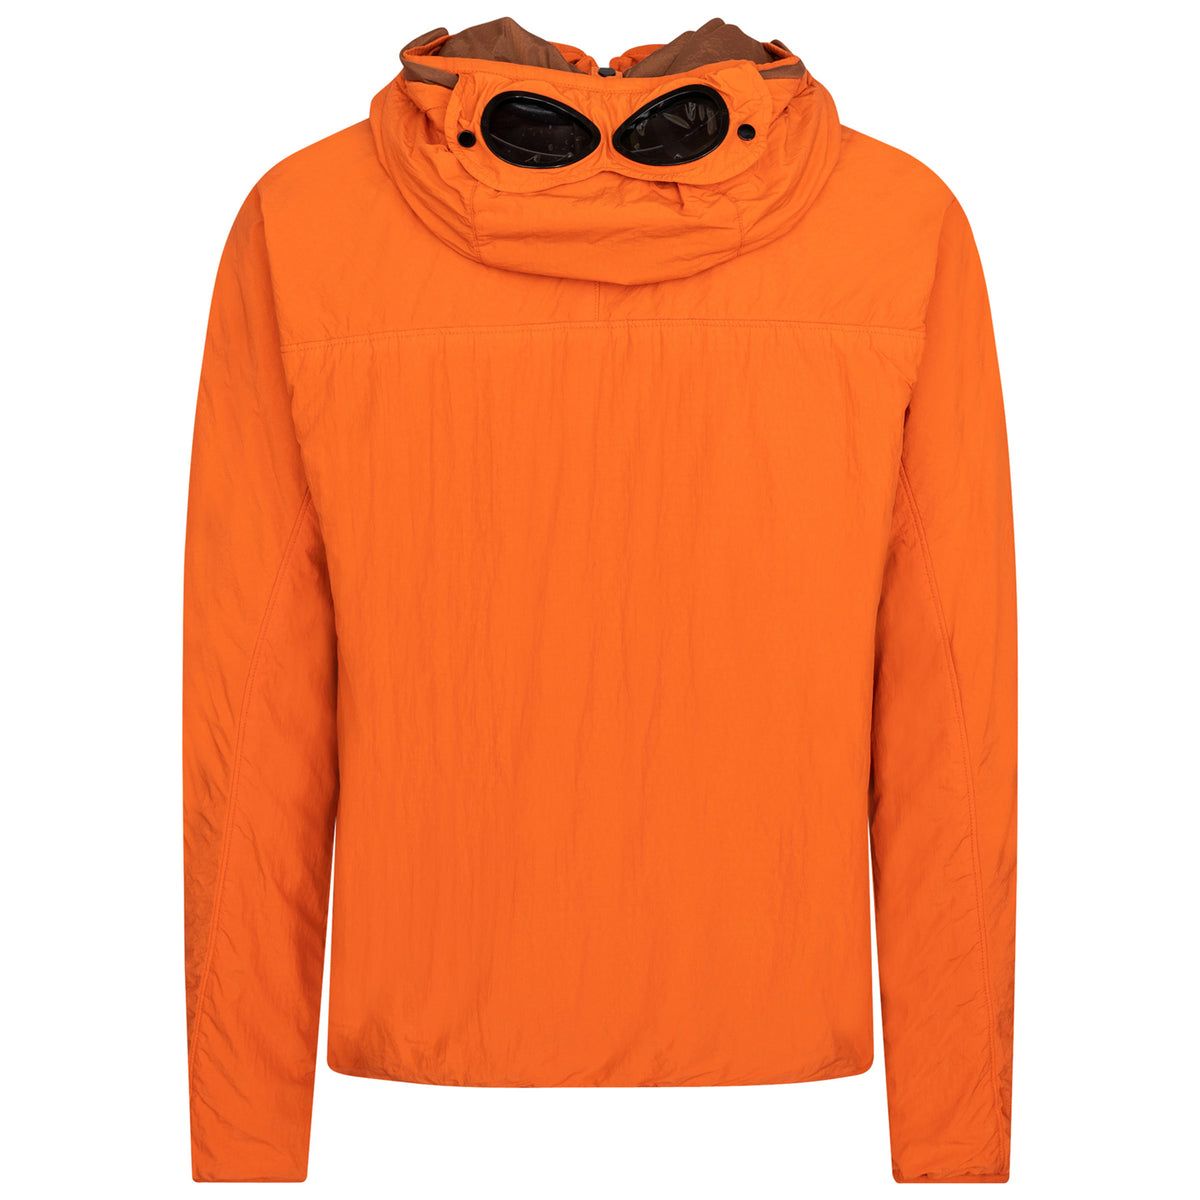 Load image into Gallery viewer, C.P. Company Harvest Pumpkin G.D.P. Goggle Jacket
